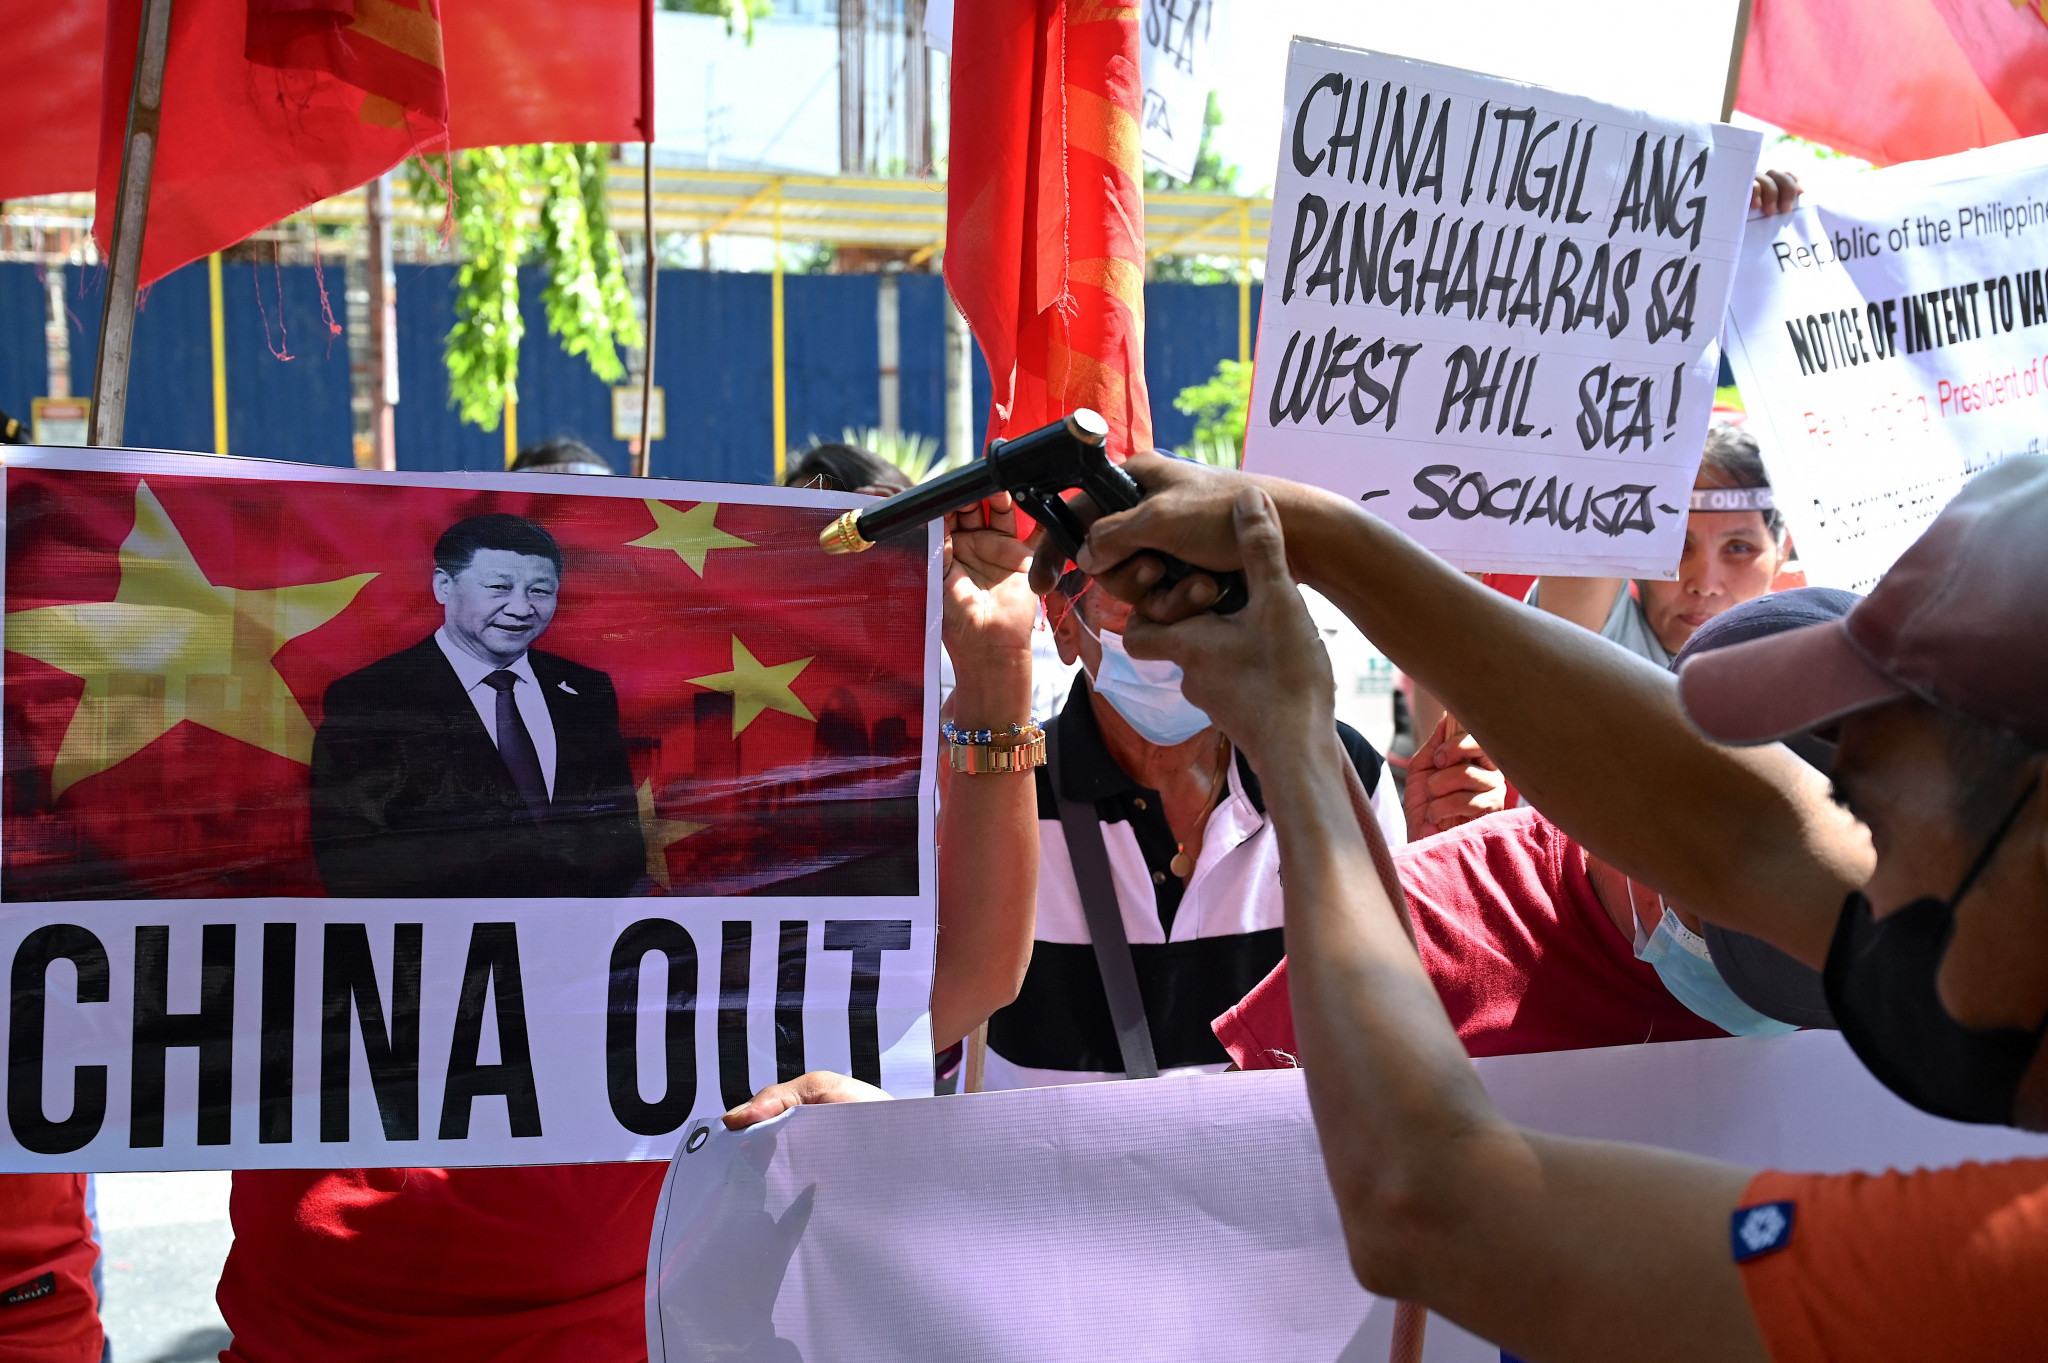 Tensions are high between China and the Philippines due to a territorial dispute ©Getty Images